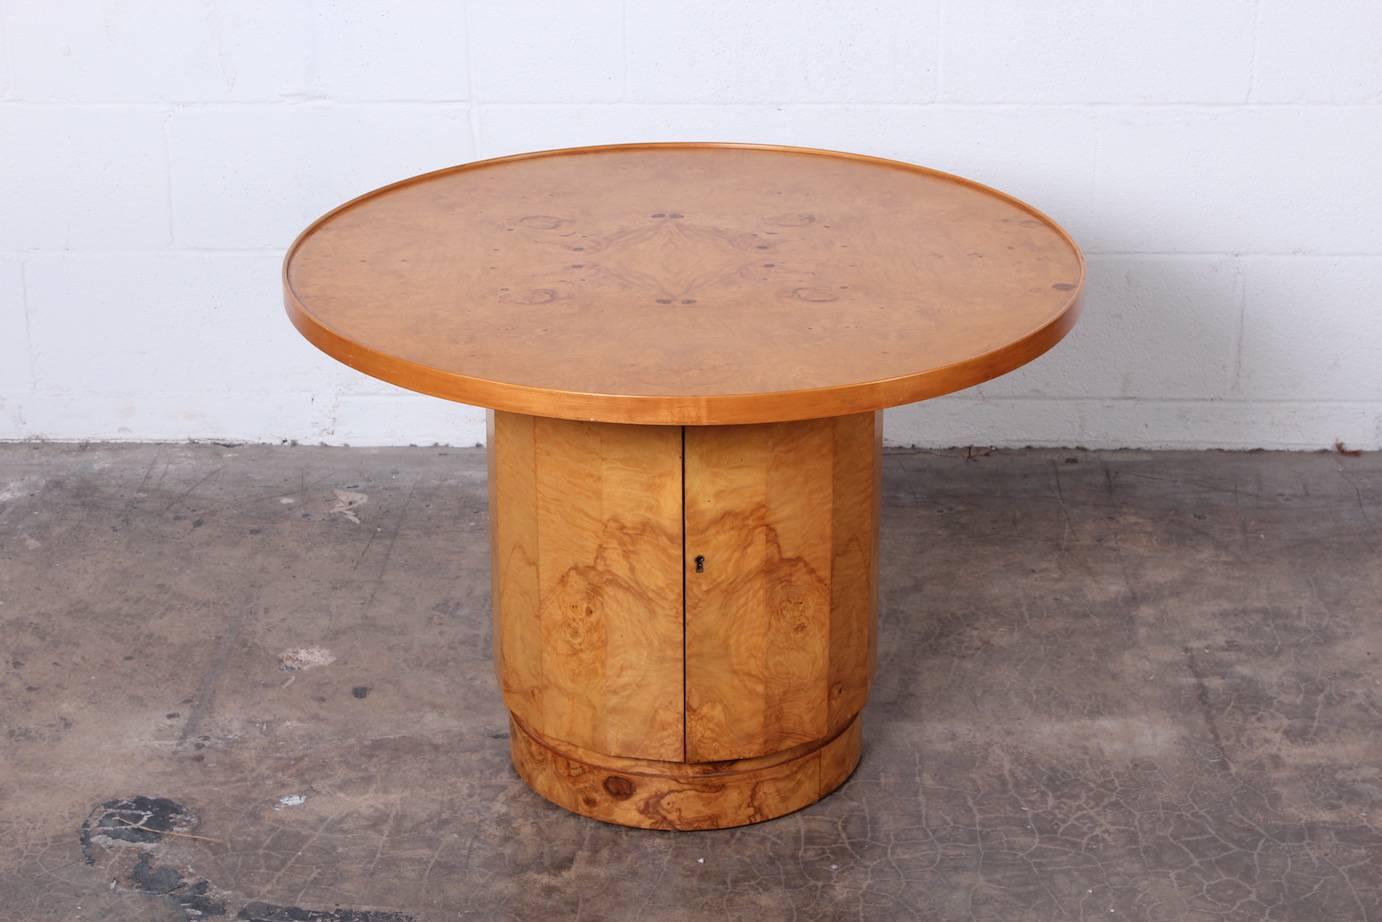 A large olive burl table with concealed dry bar storage. Designed by Edward Wormley for Dunbar.